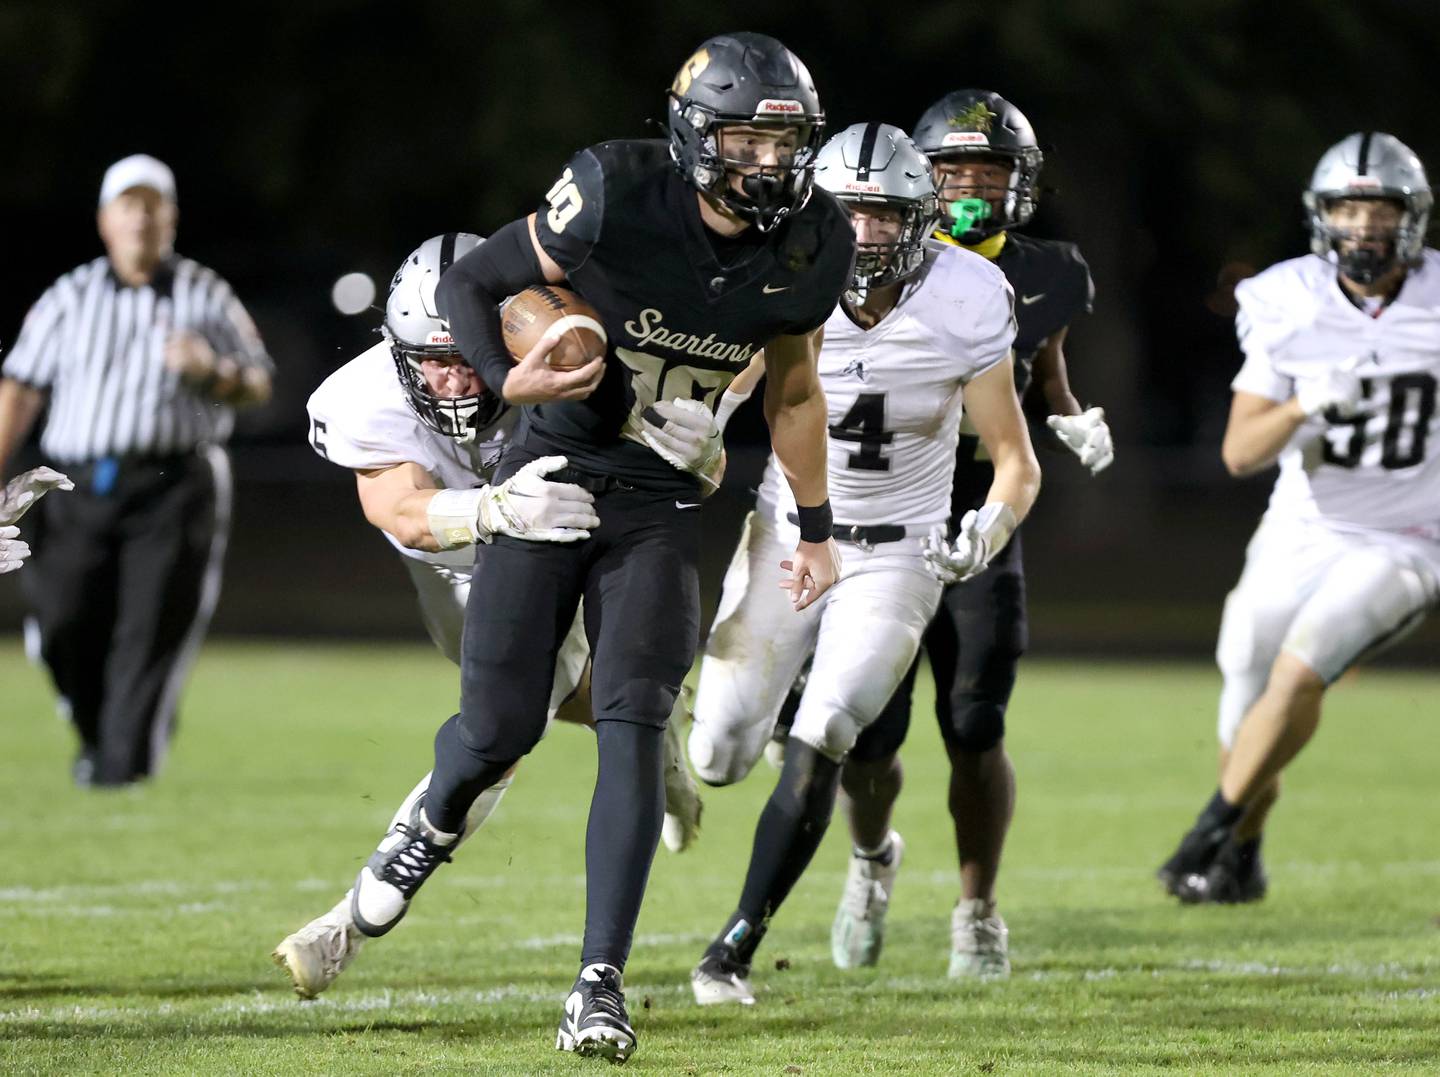 Sycamore's Burke Gautcher tries to pull away from Kaneland's Josh Mauthe during their game Friday, Sept. 29, 2023, at Sycamore High School.